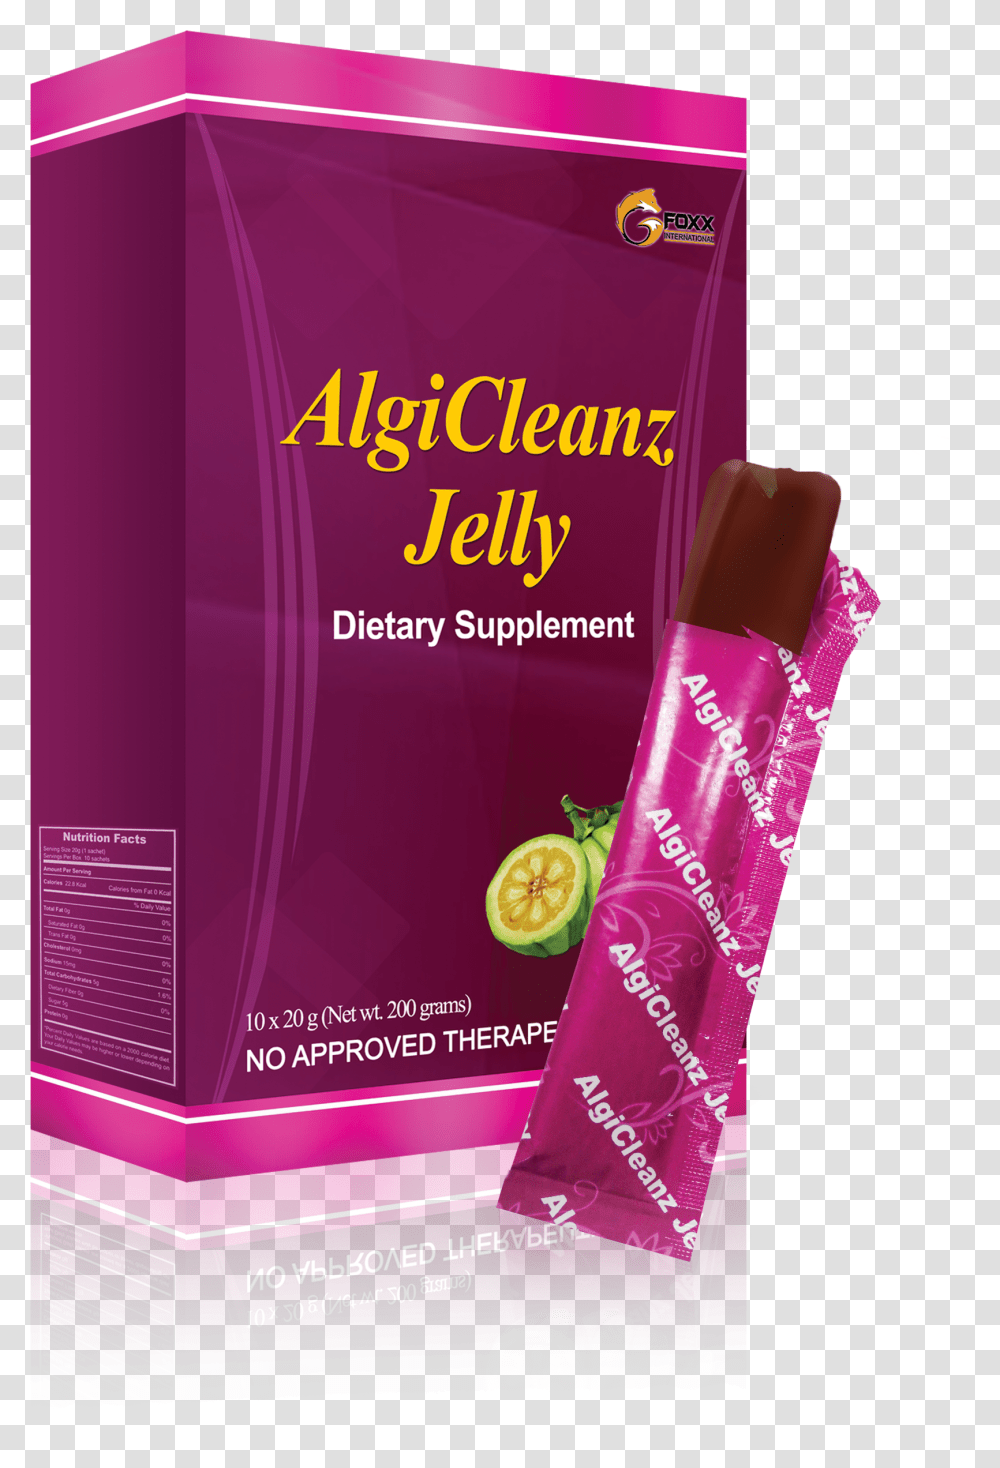 Algicleanz Jelly Box, Bottle, Cosmetics, Shampoo, Lotion Transparent Png